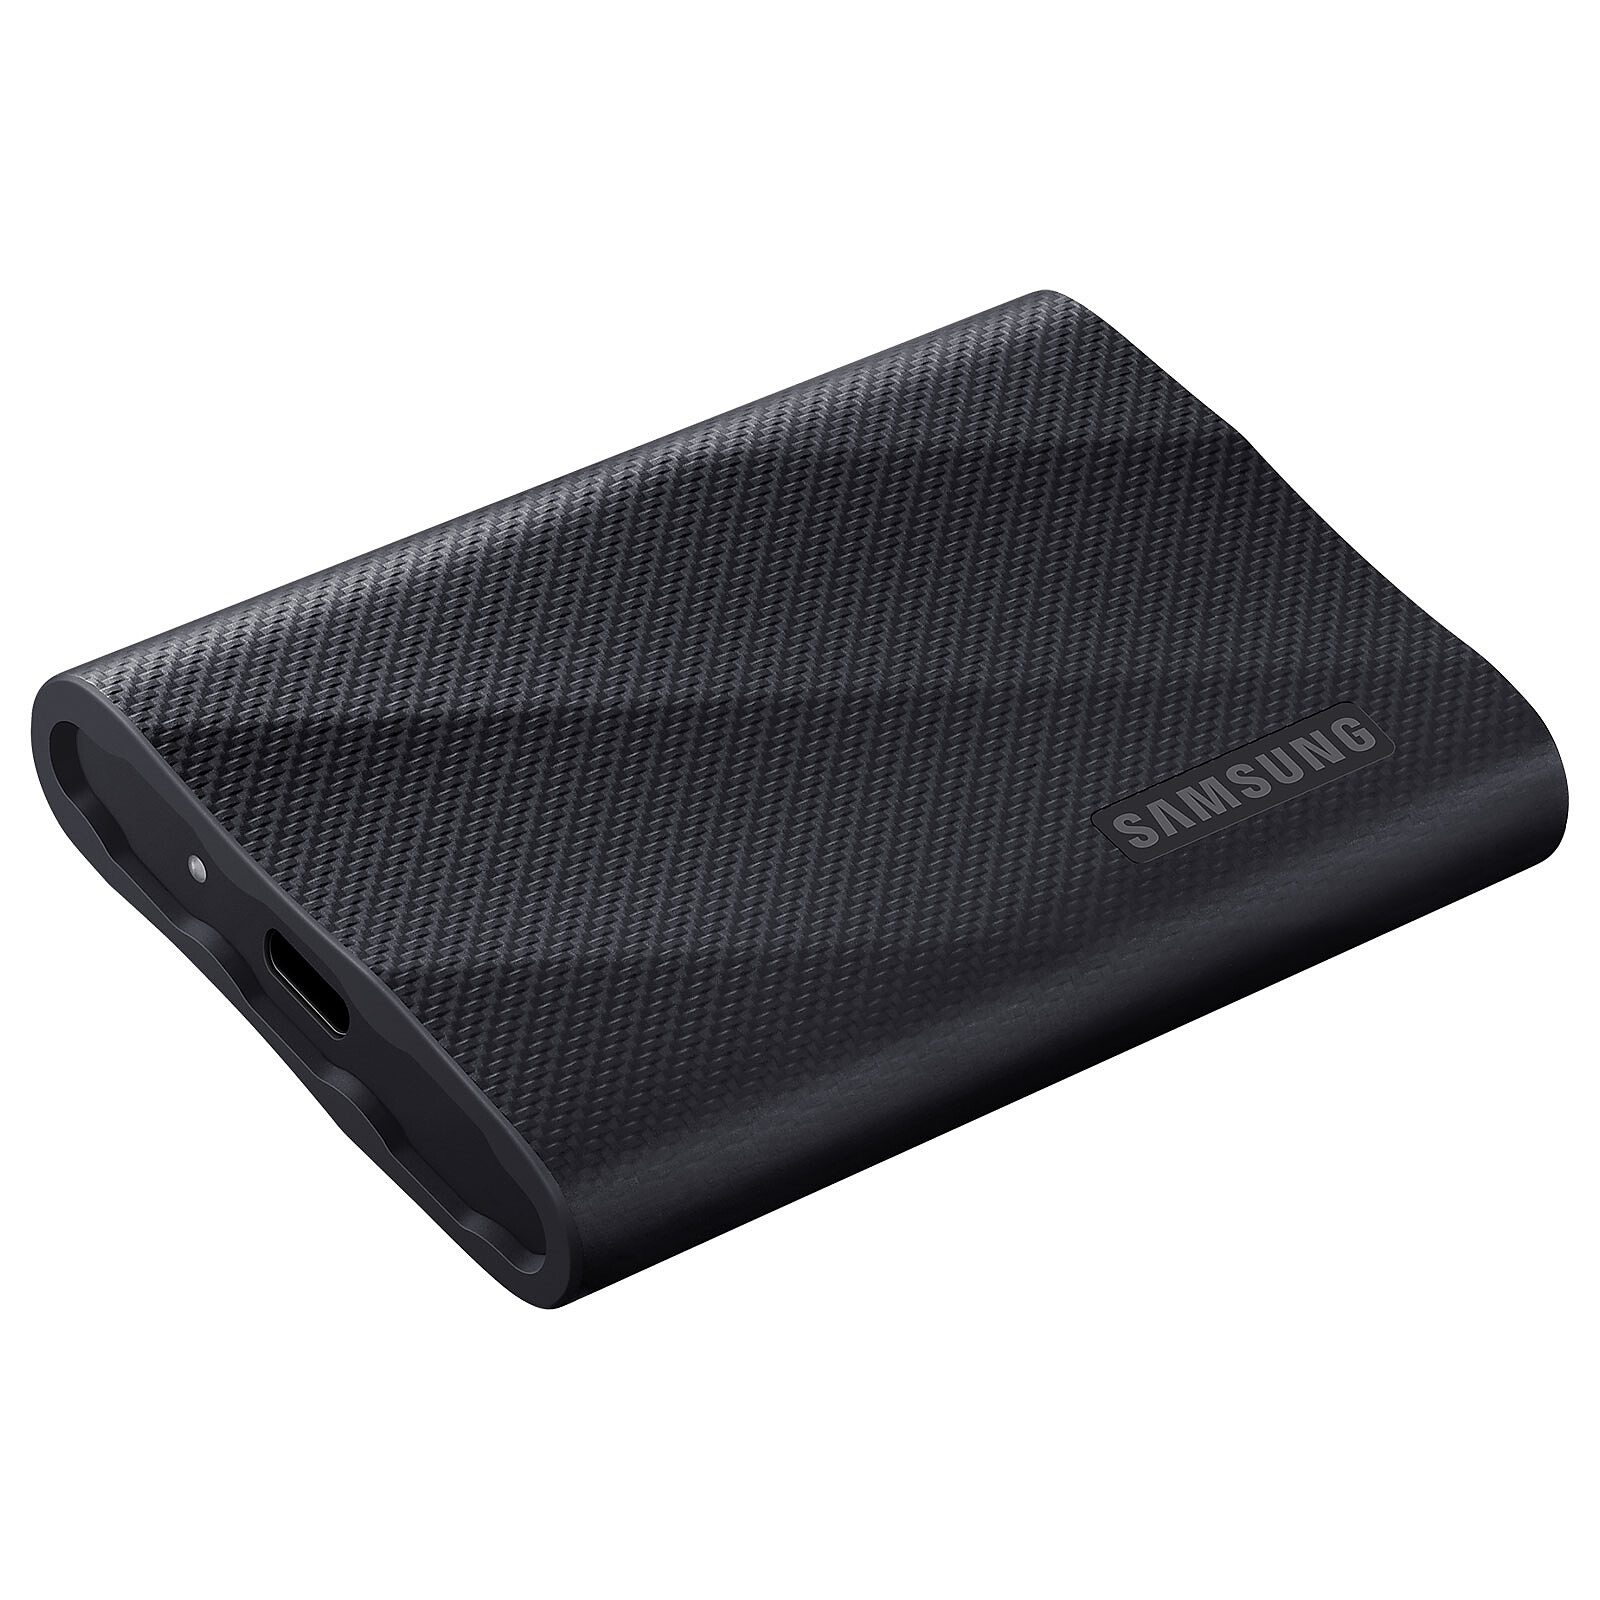 SAMSUNG Portable SSD T9 4To